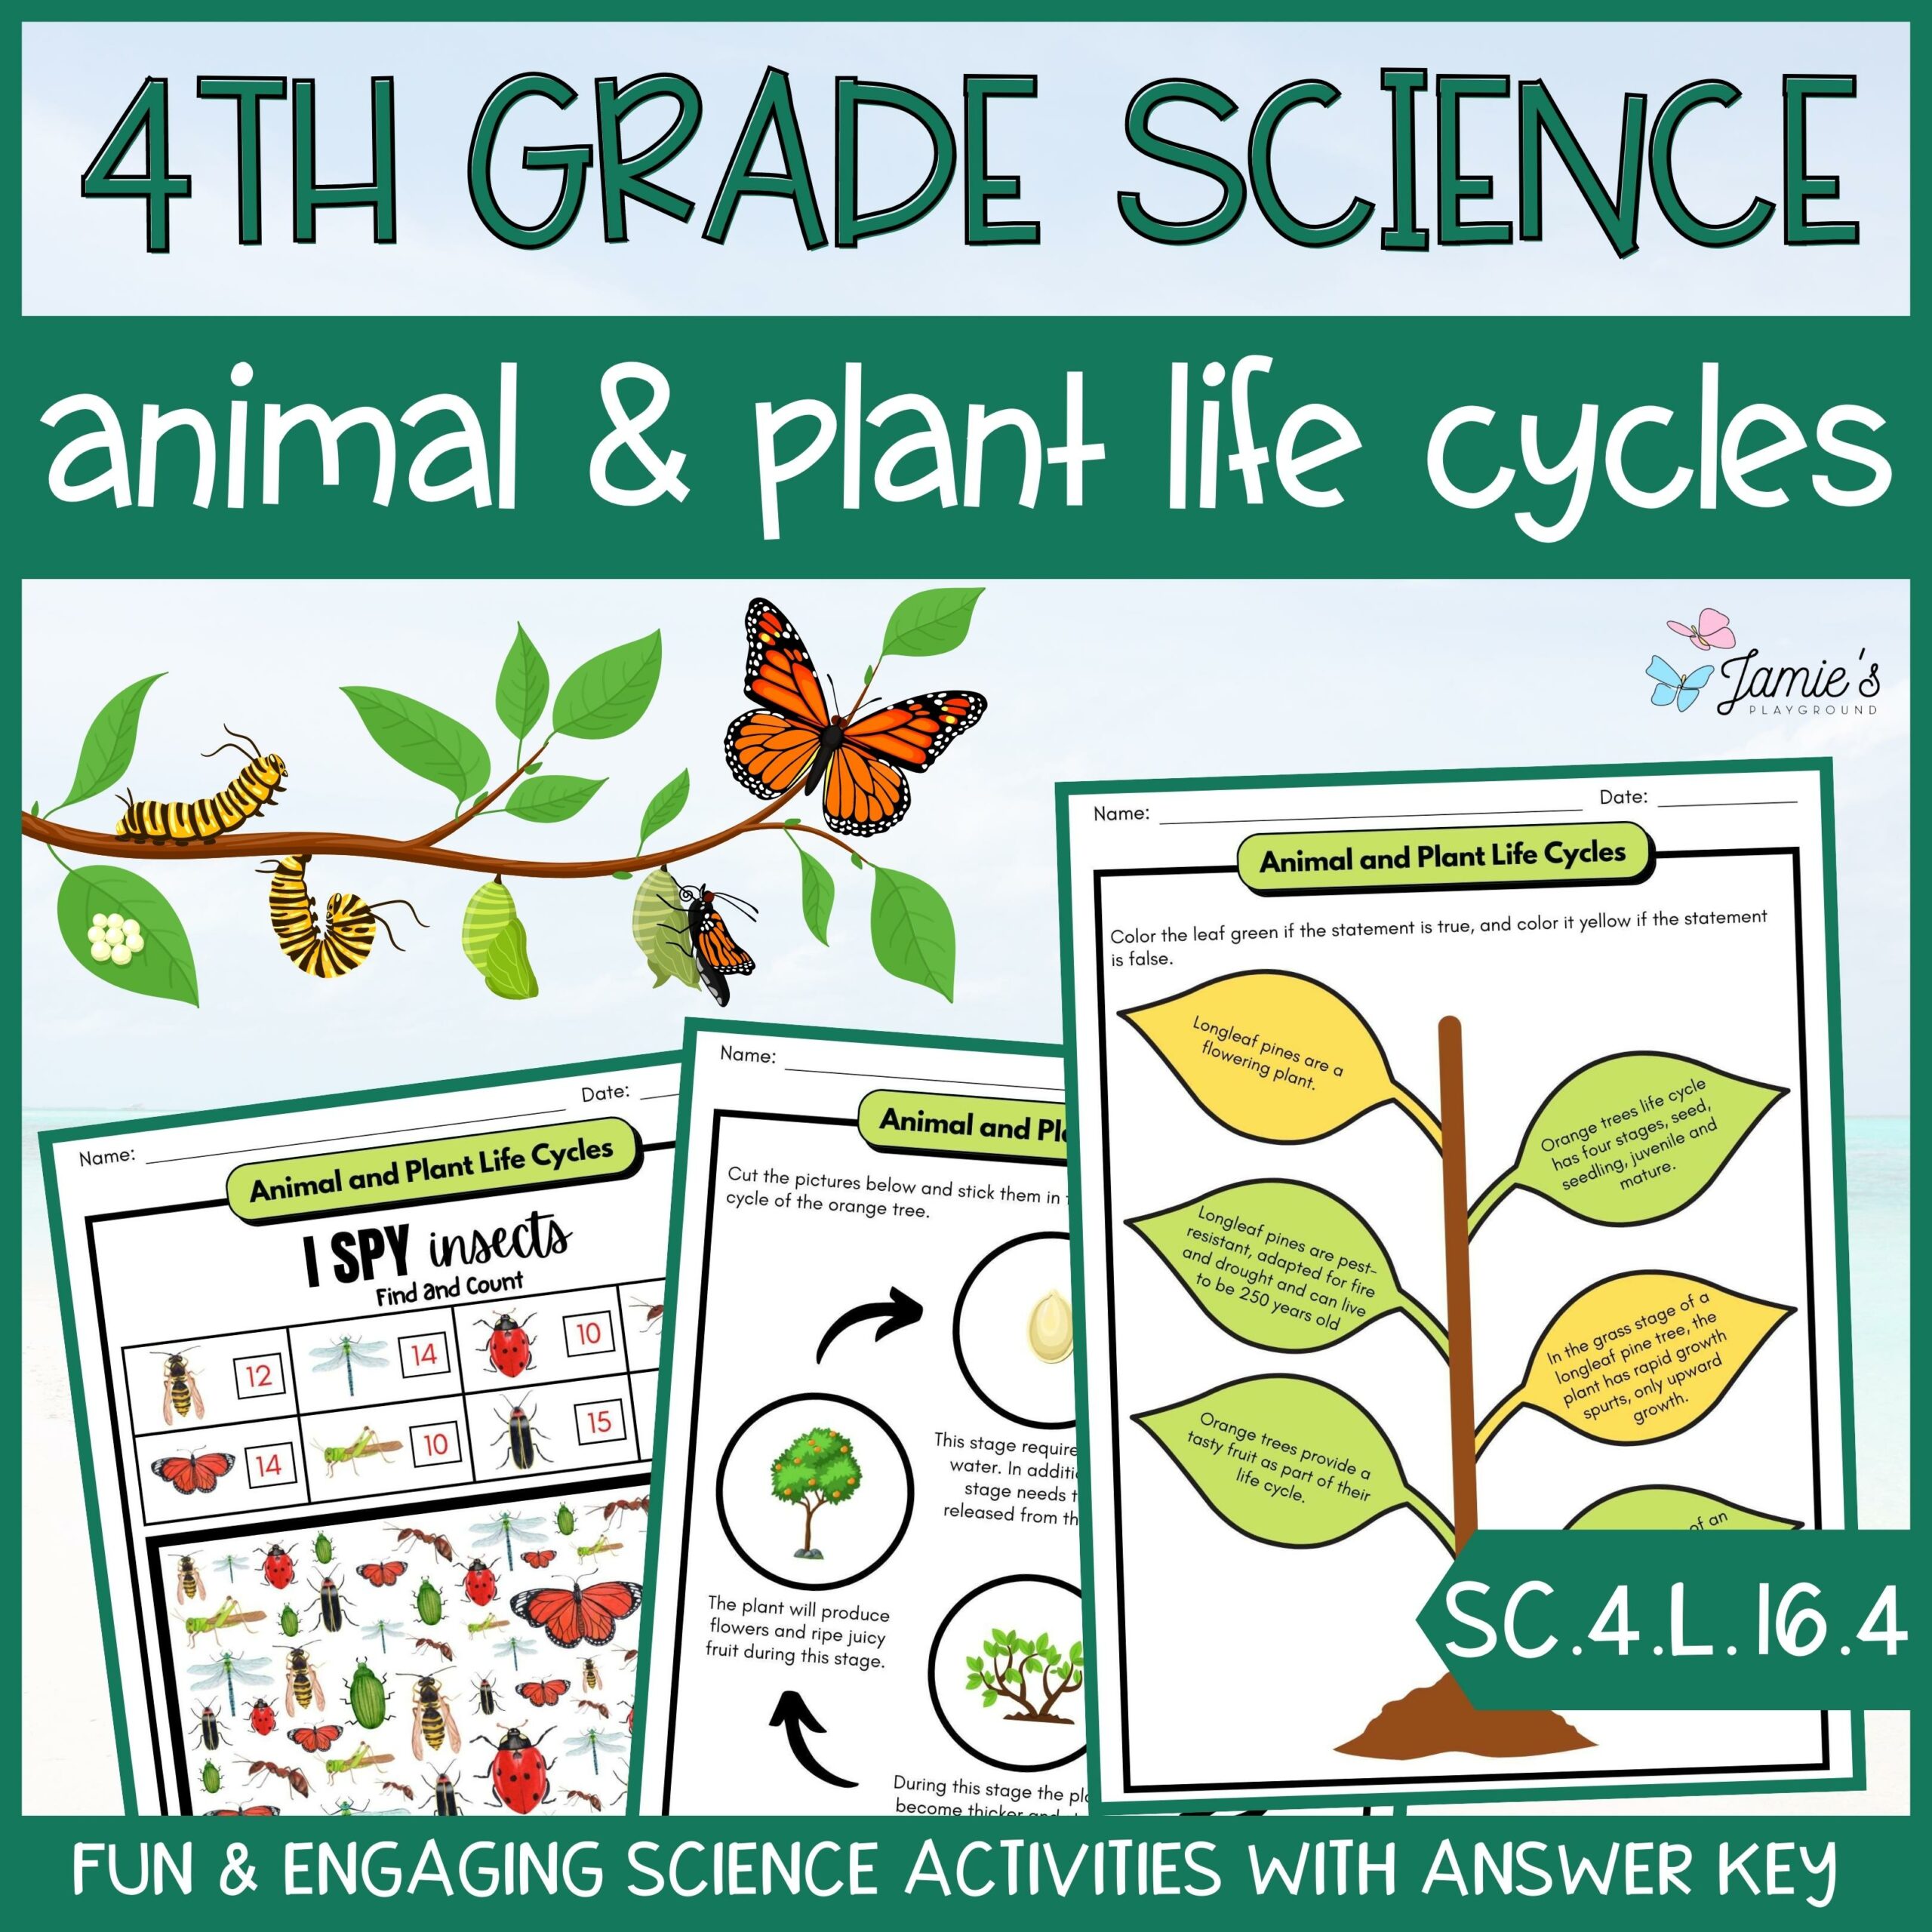 Animal & Plant Life Cycle - 4th Grade Life Science - ACTIVITIES + ANSWER KEY